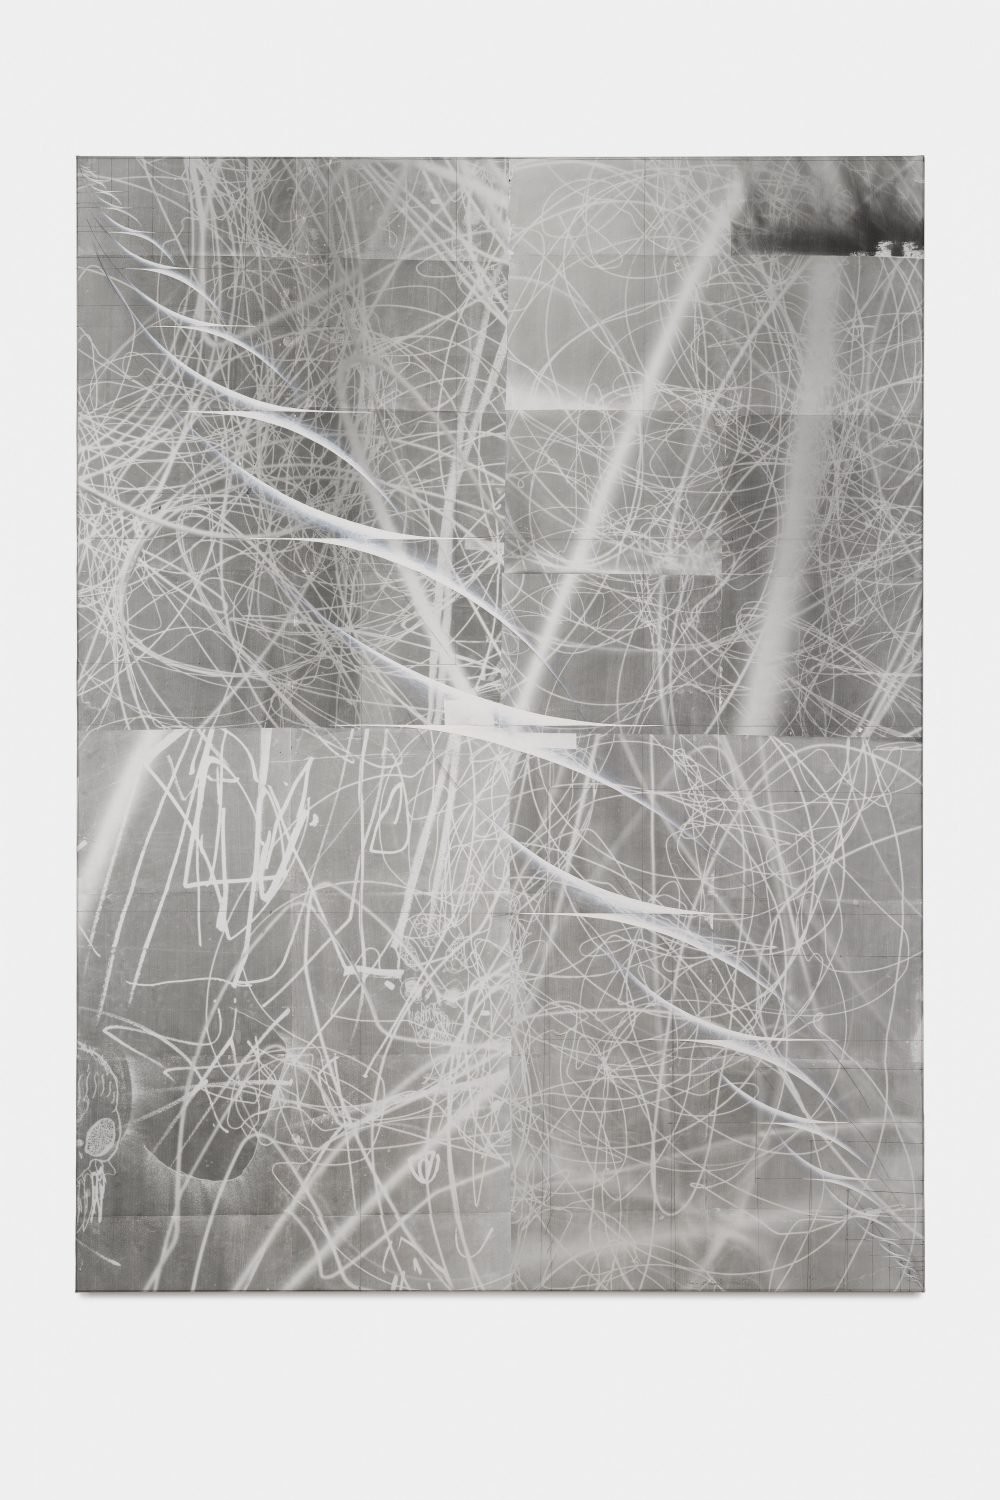 Tillman KaiserUntitled, 2018Black and white photo on paper on canvas200 x 150 cm